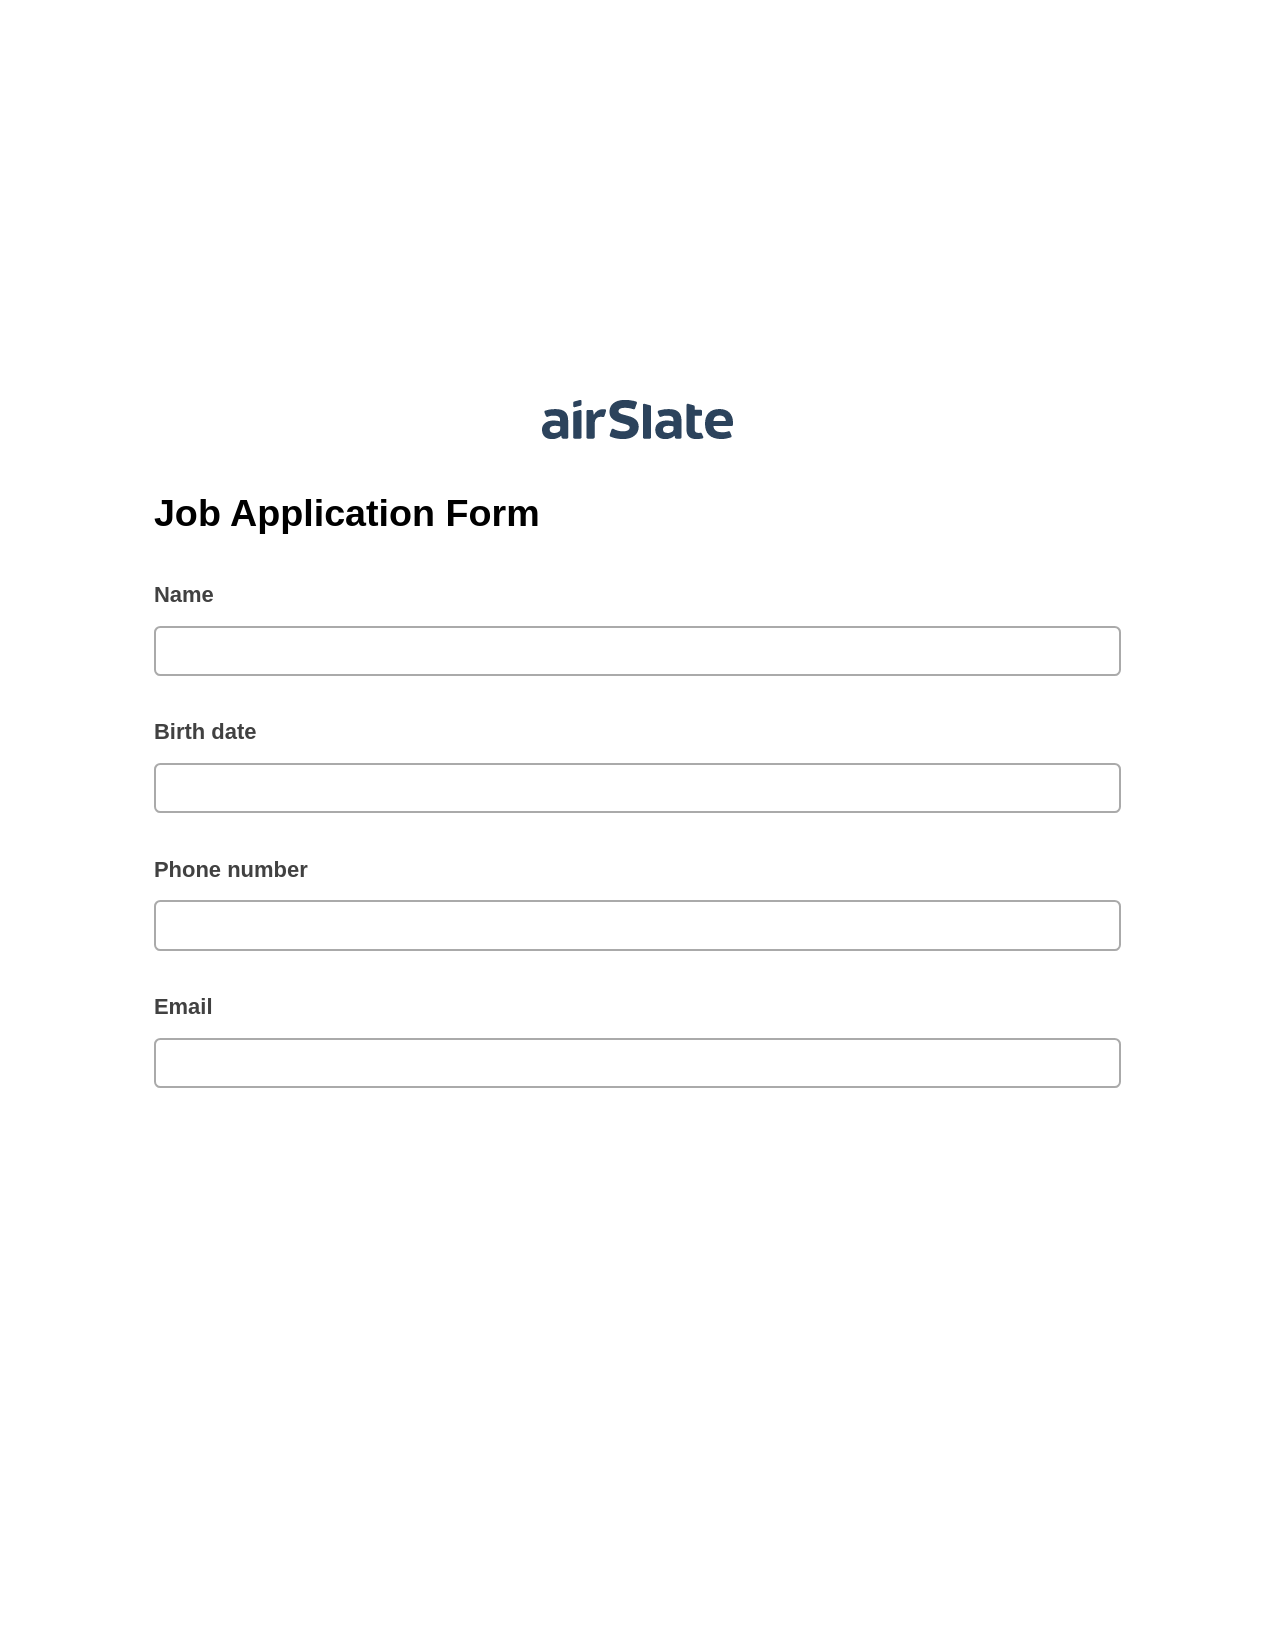 Job Application Form Pre-fill from CSV File Dropdown Options Bot, Create MS Dynamics 365 Records Bot, Post-finish Document Bot